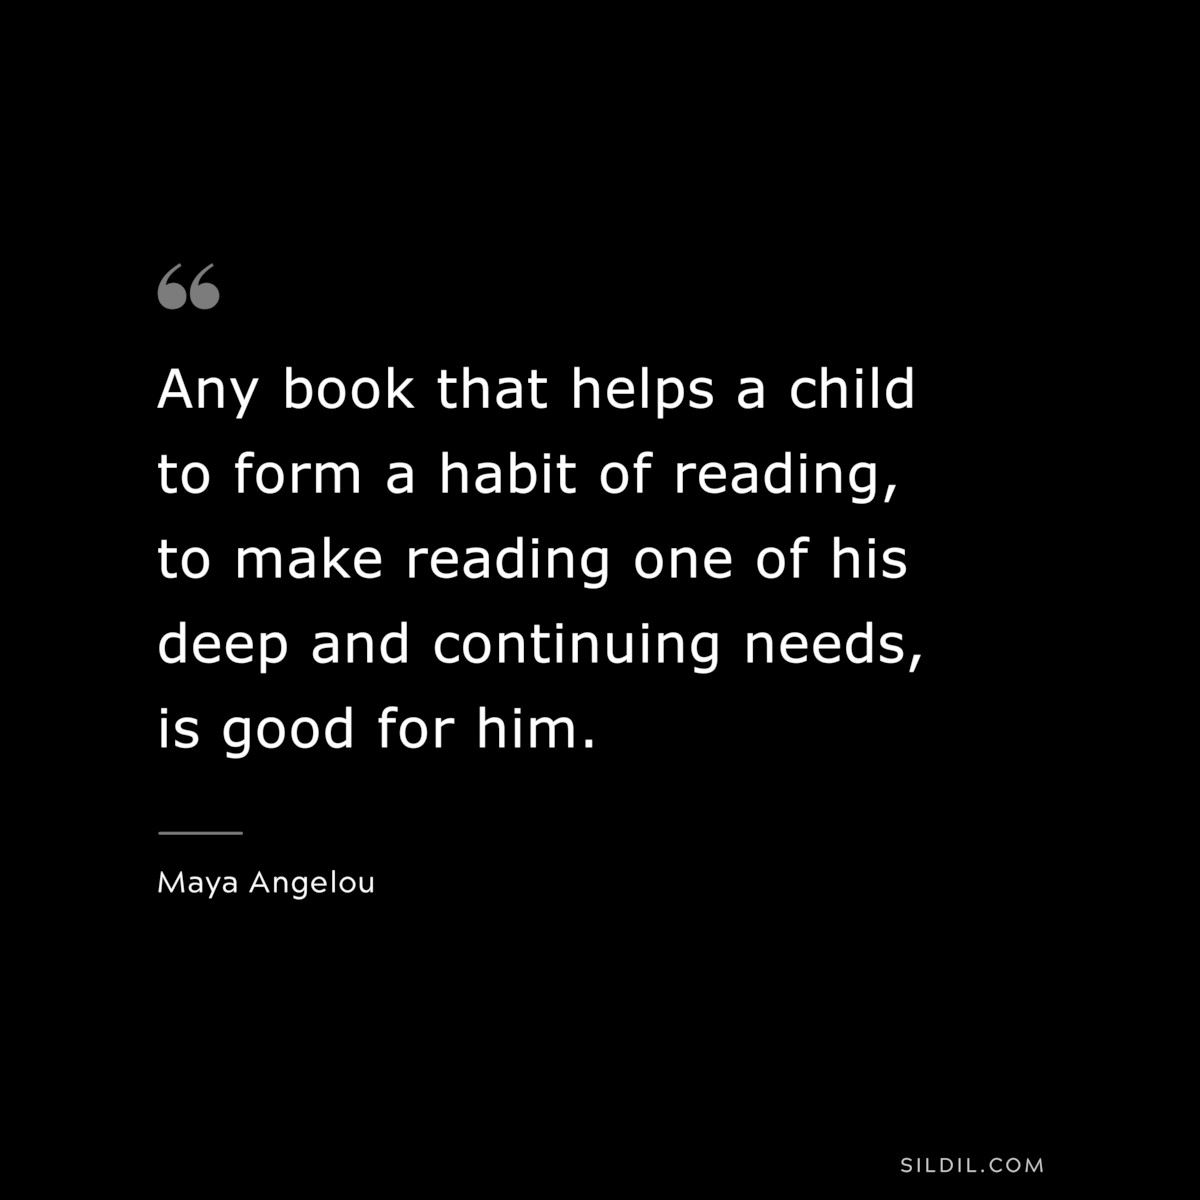 Any book that helps a child to form a habit of reading, to make reading one of his deep and continuing needs, is good for him. ― Maya Angelou